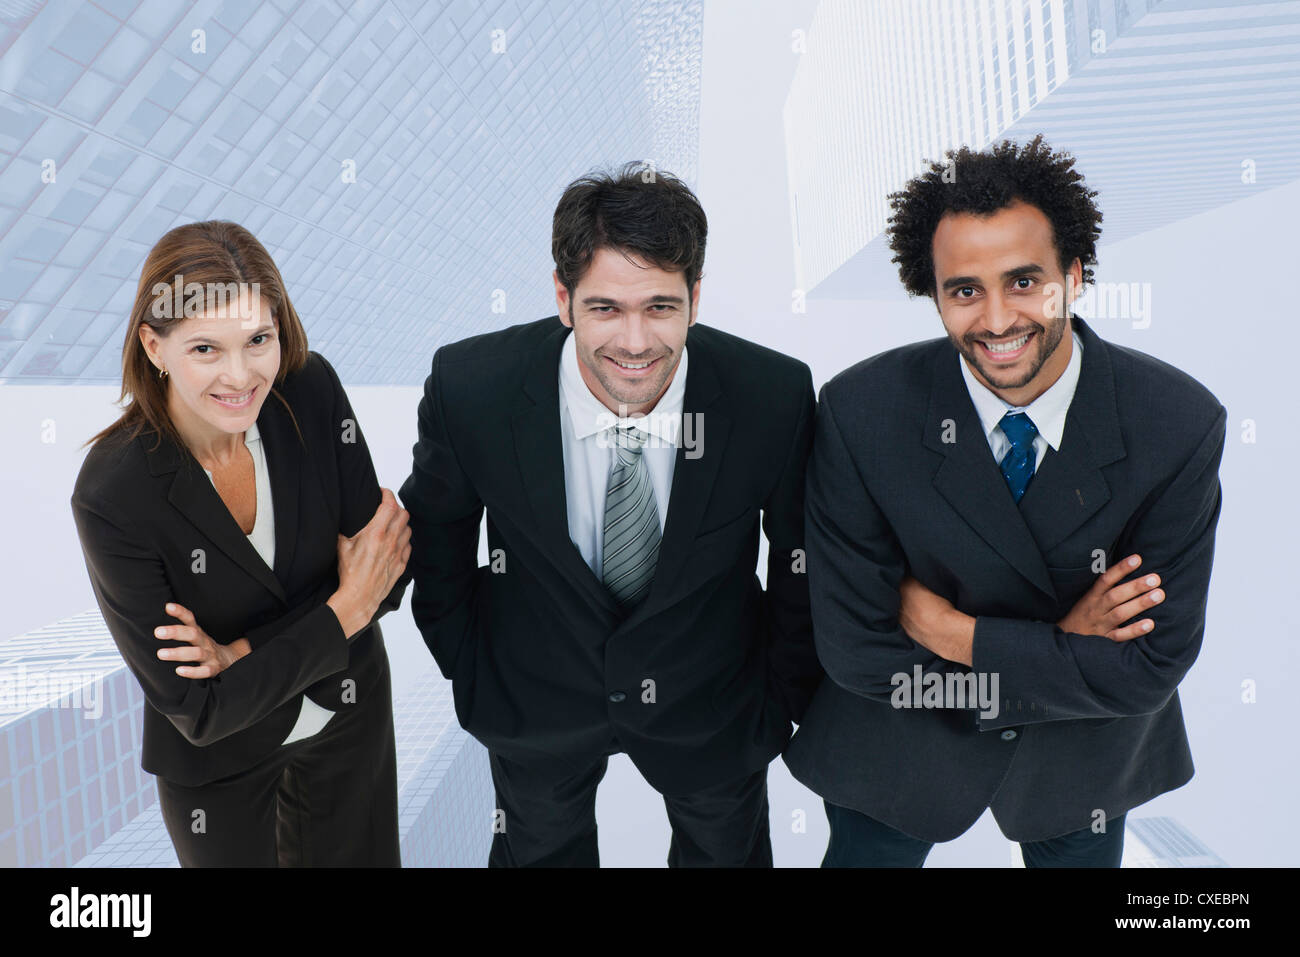 Team of executives smiling confidently with skyscrapers superimposed on background Stock Photo